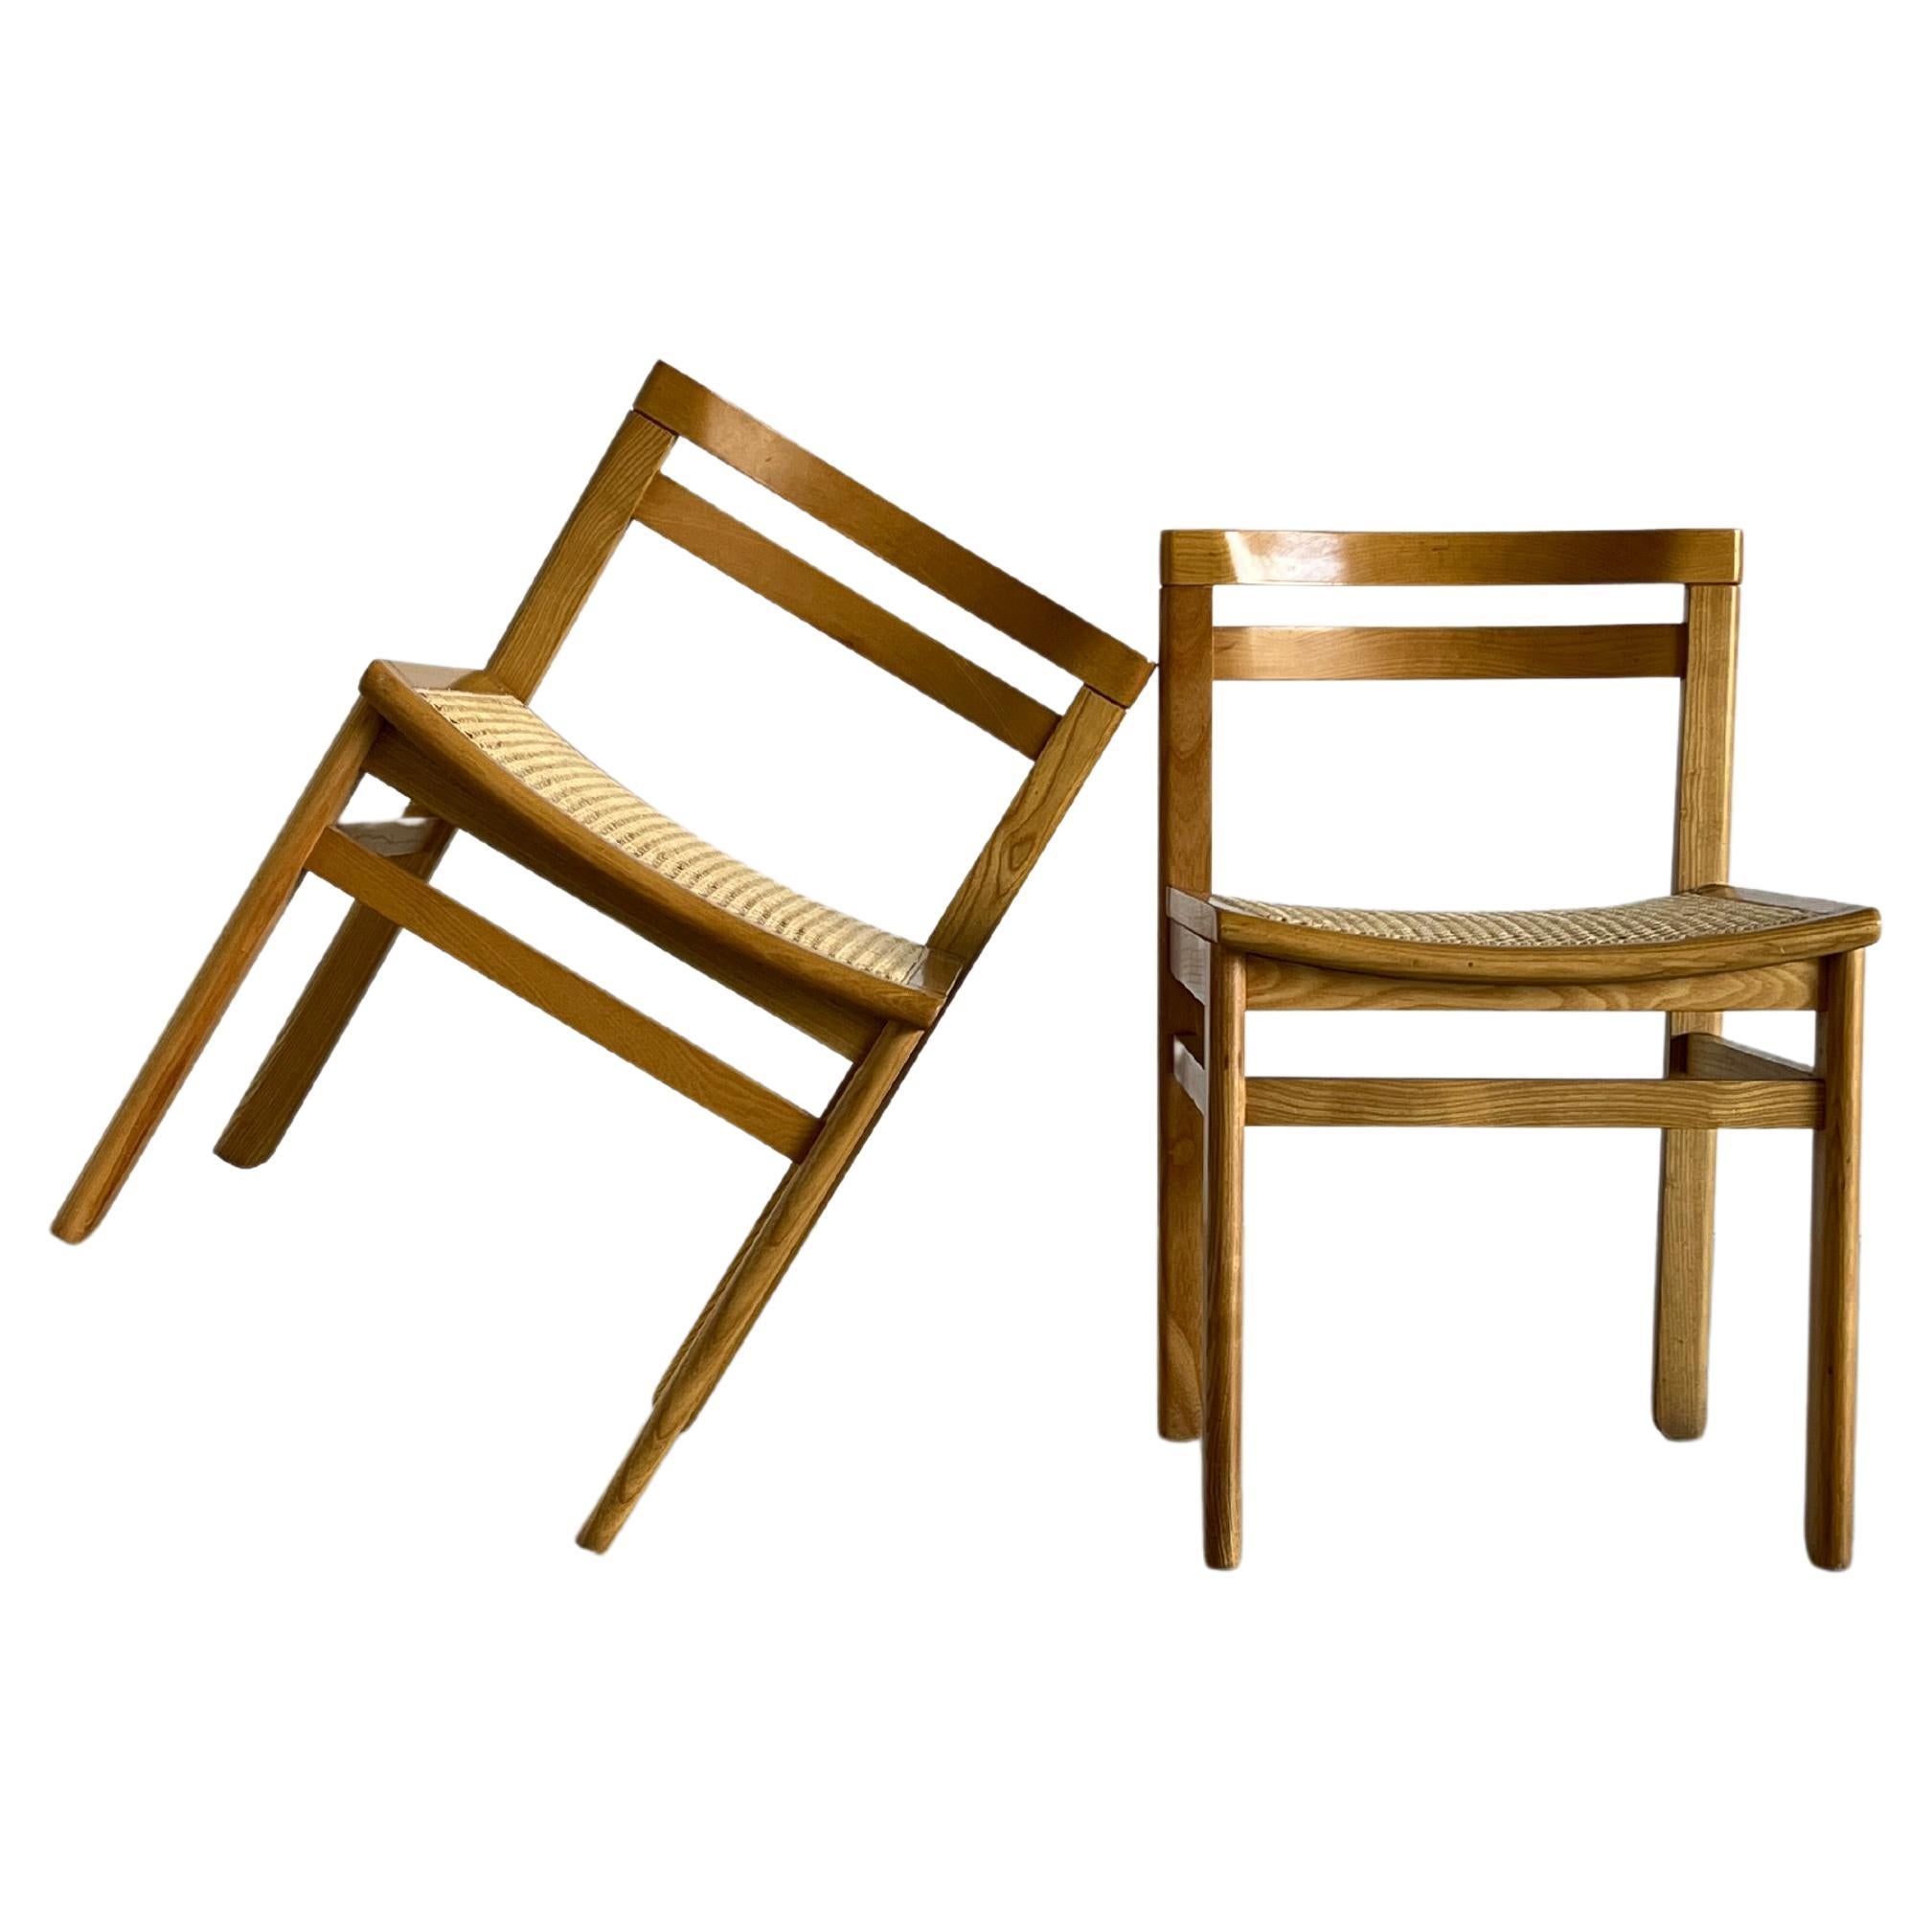 Pair of Vintage Mid-Century Wooden Dining Chairs in Beech and Cane, 1960s For Sale